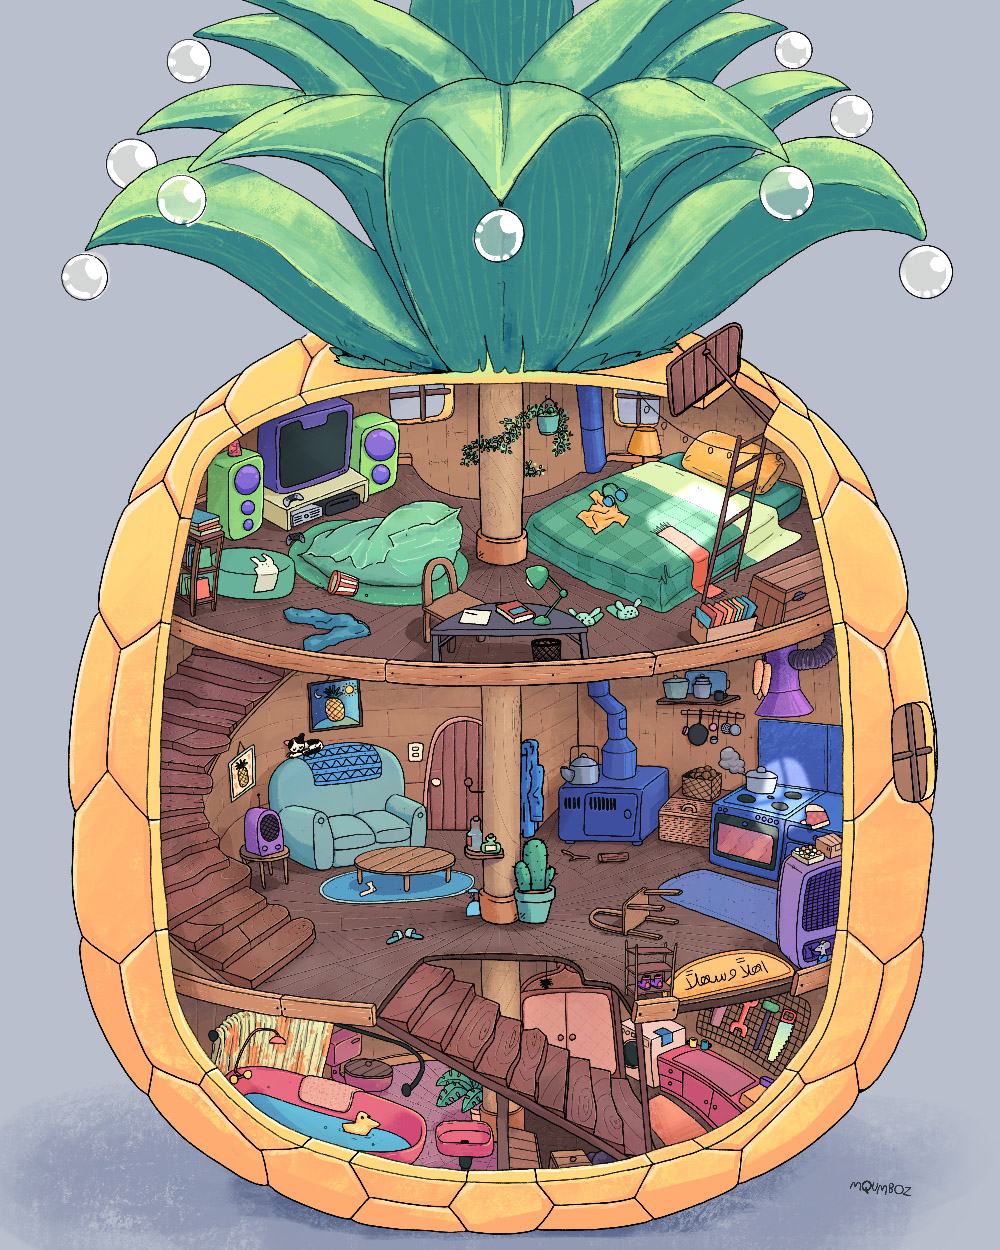 Cross section of a house built within a pineapple